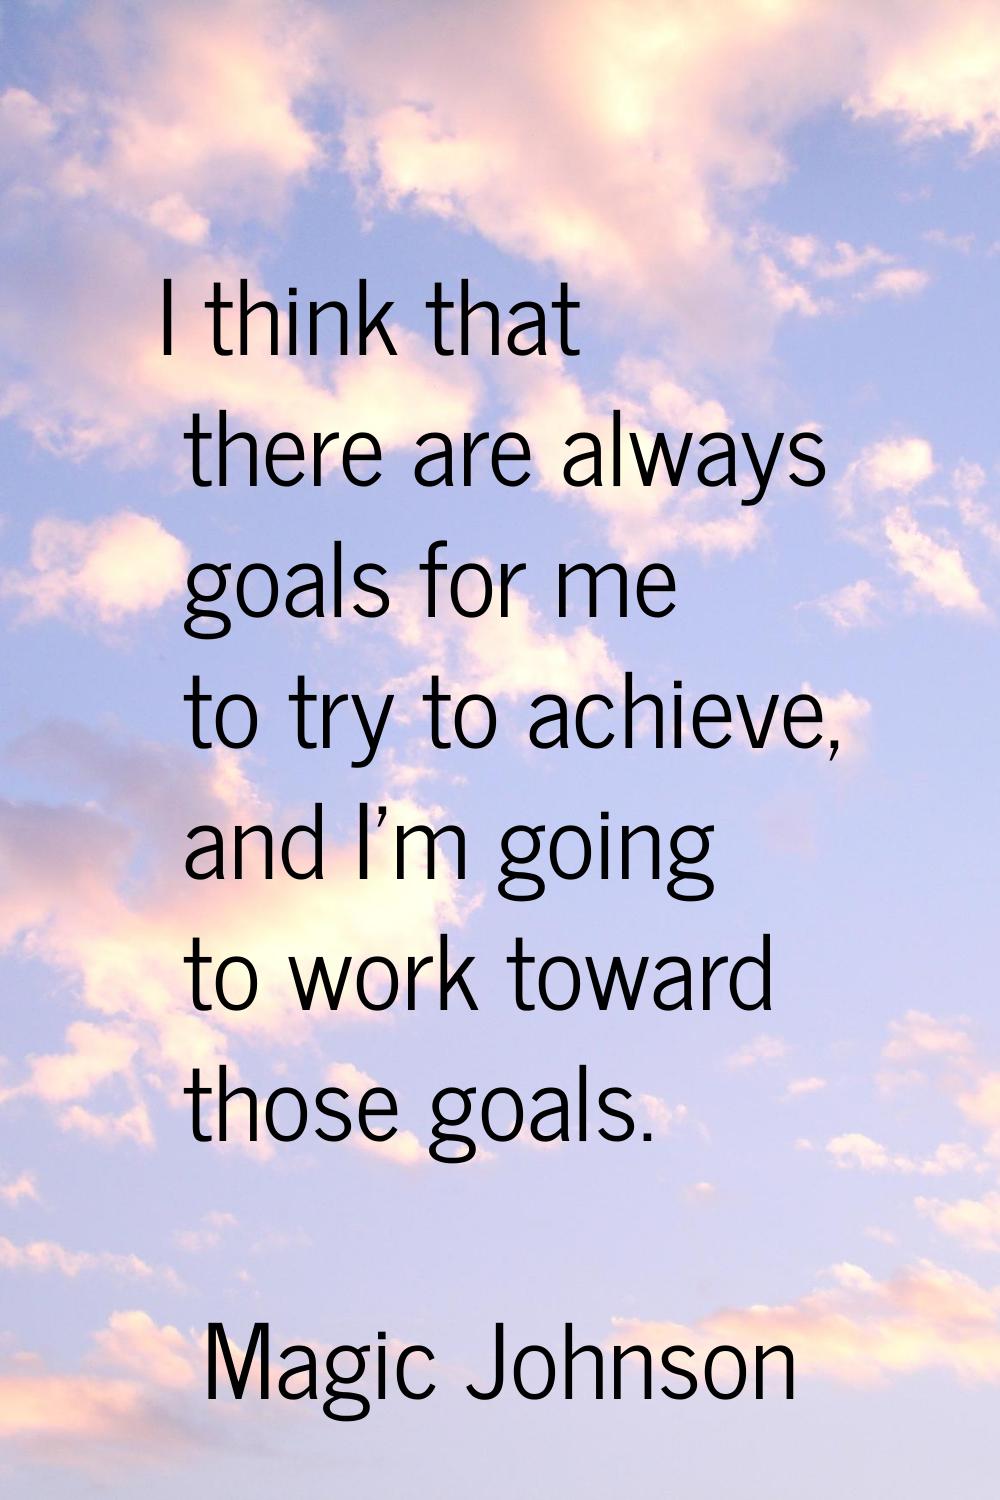 I think that there are always goals for me to try to achieve, and I'm going to work toward those go